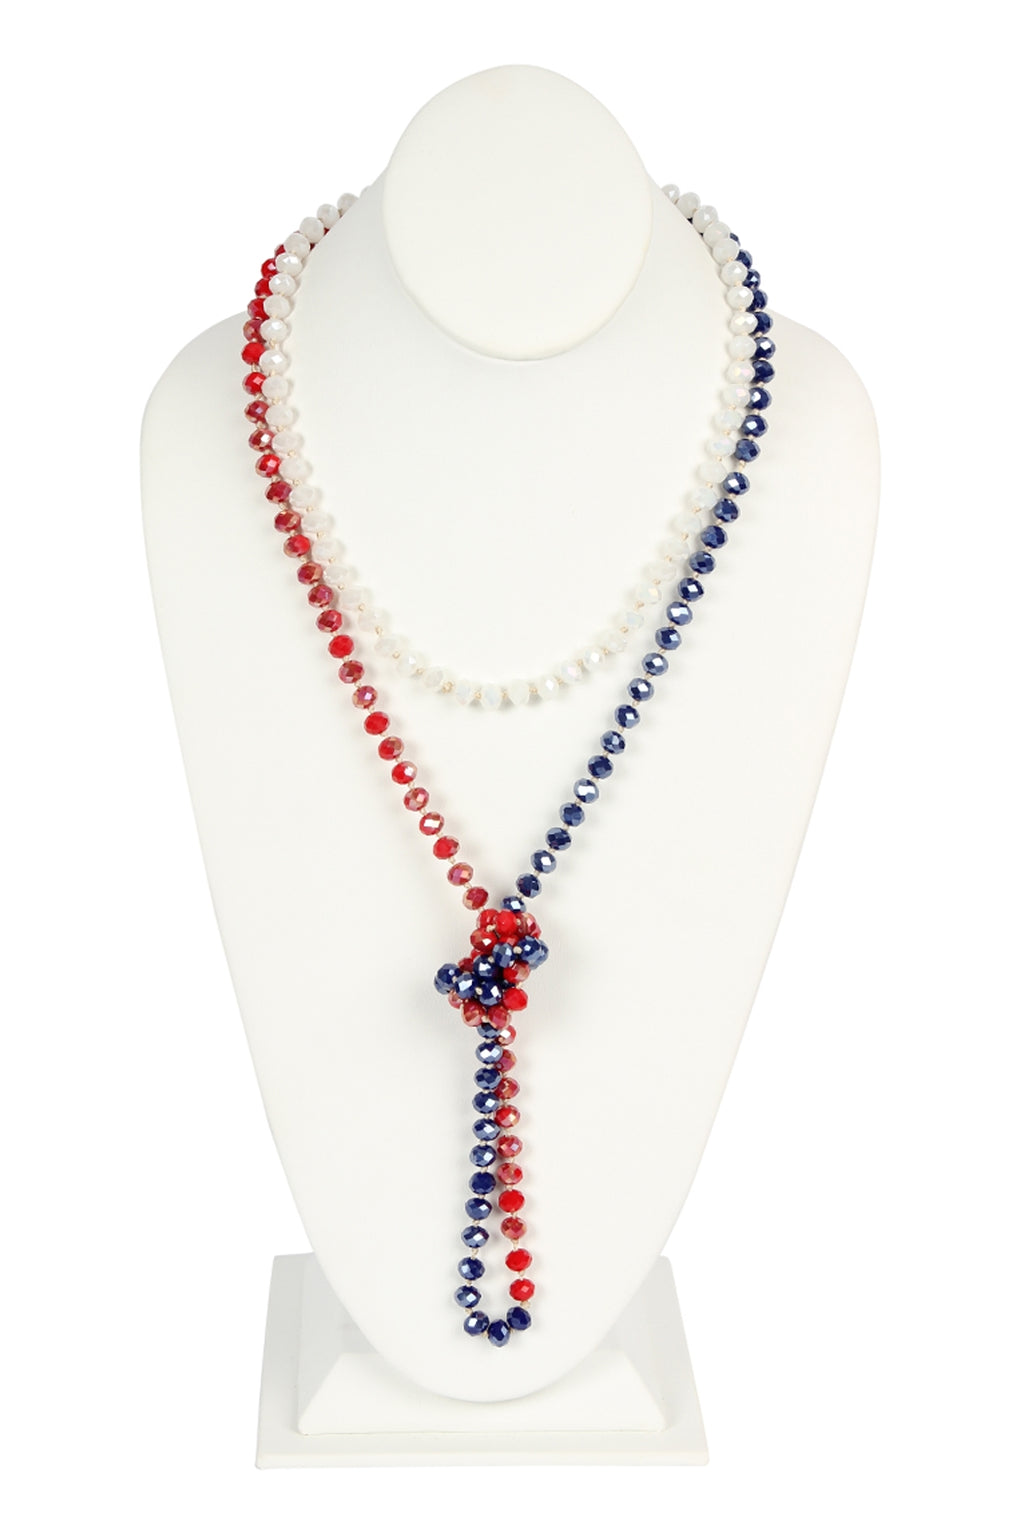 USA 3 Longline Hand Knotted Necklace - Pack of 6